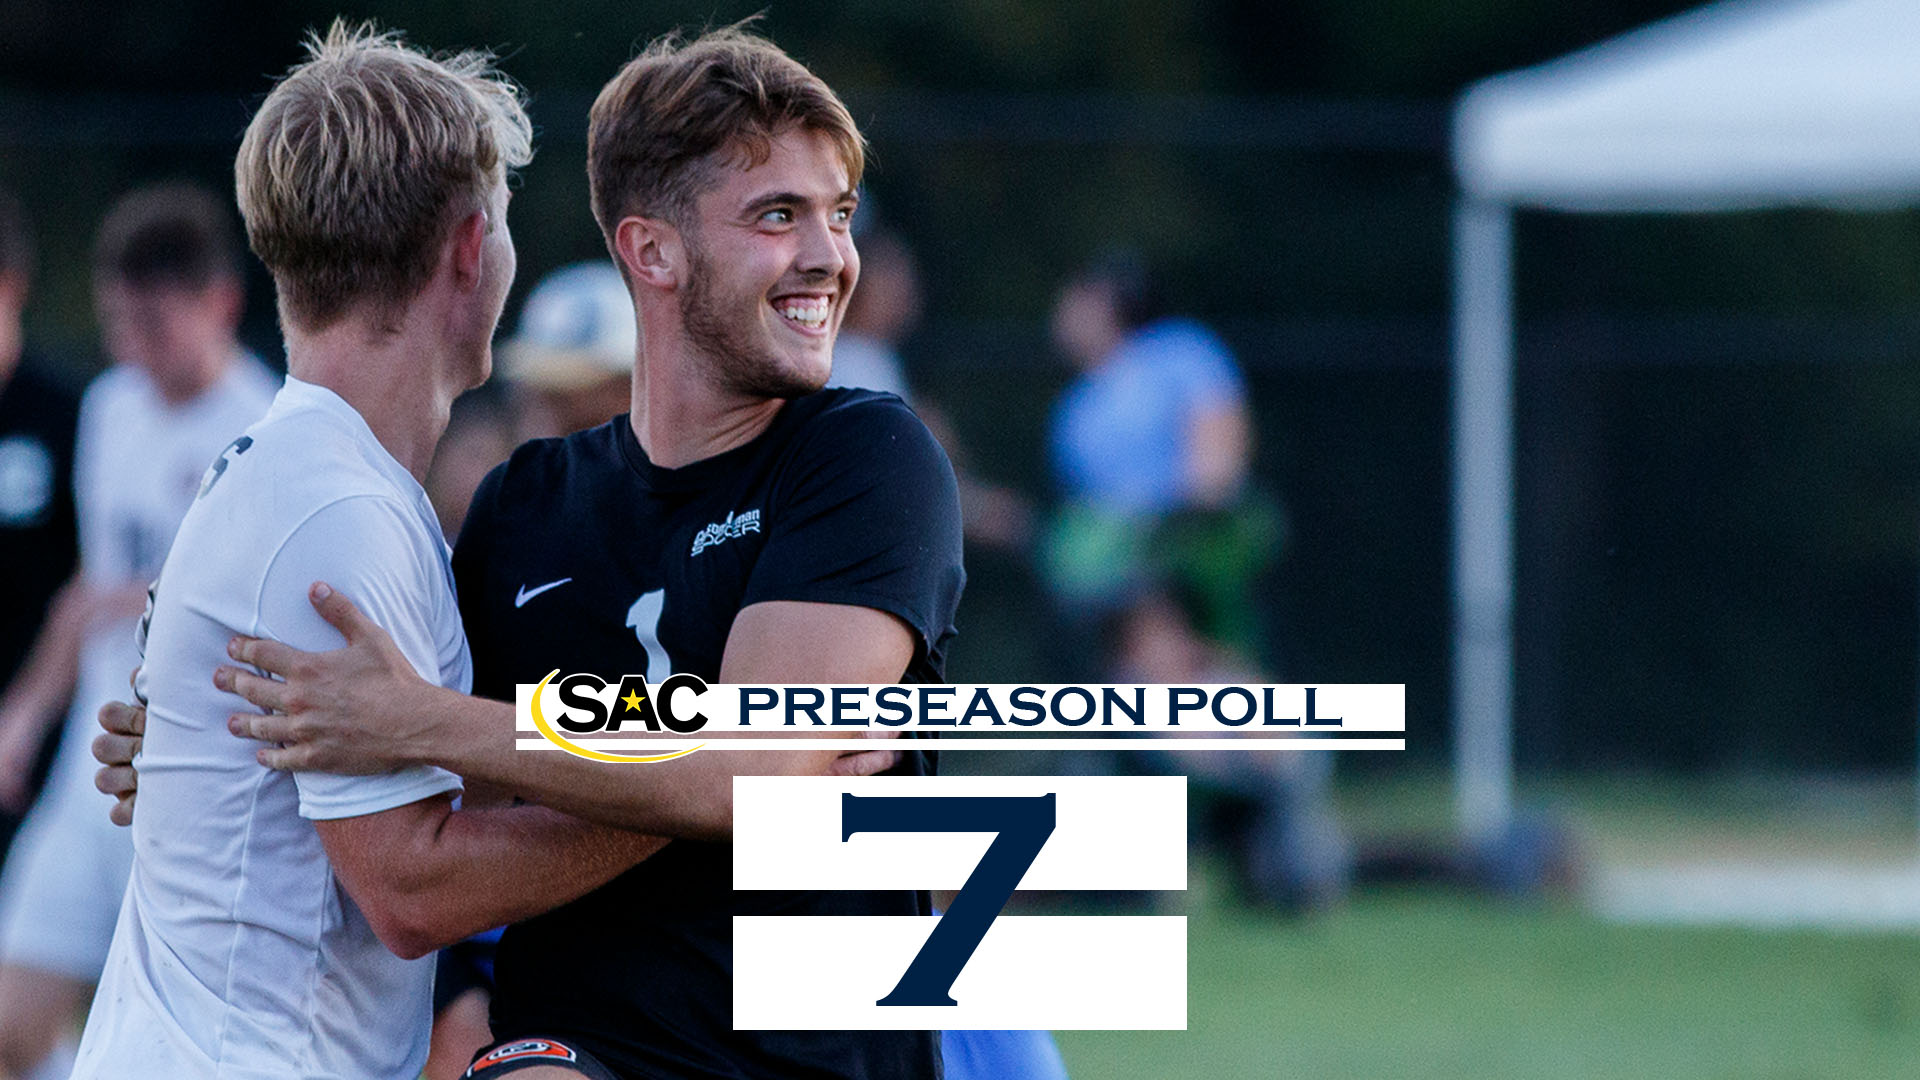 Eagles projected to finish seventh in SAC Preseason Poll